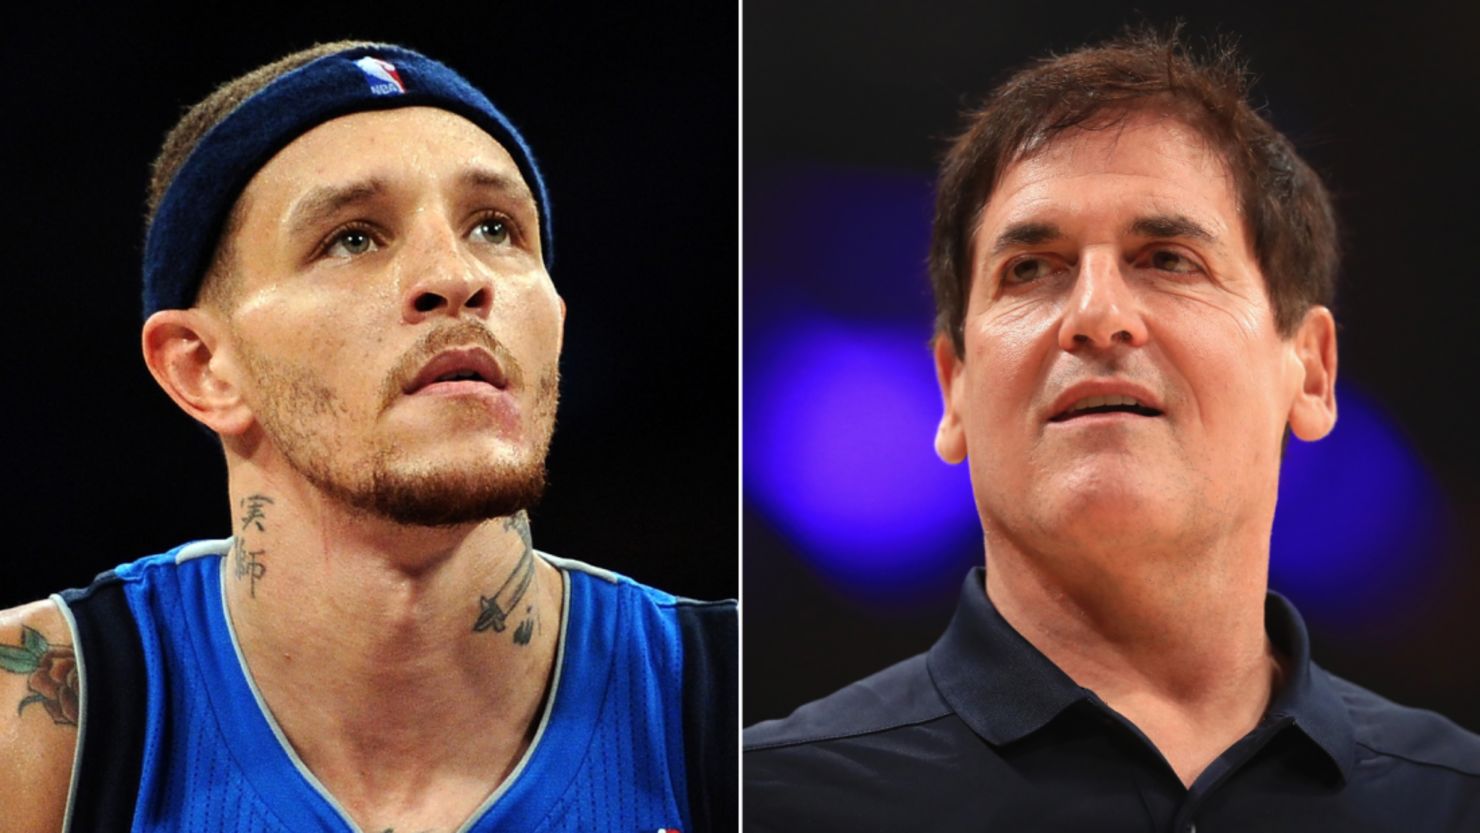 Mavericks owner Mark Cuban (right) has reached out to help former player Delonte West